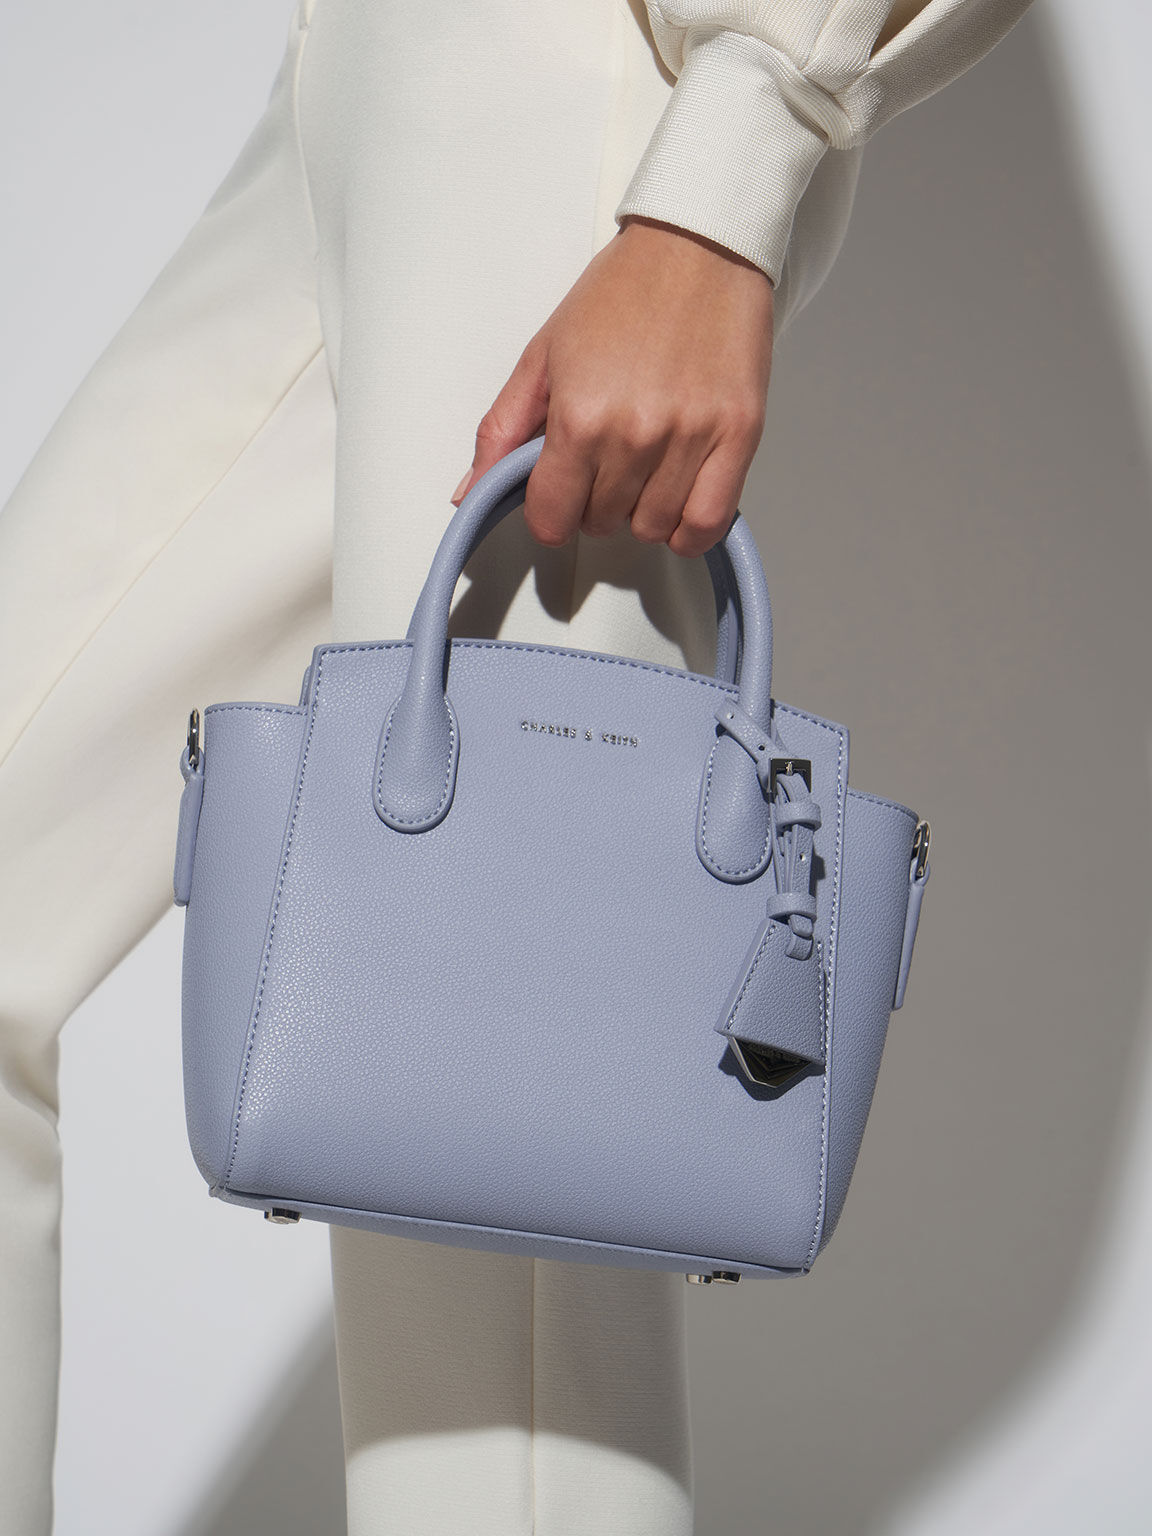 Women's Tote Bags | Shop Exclusive Styles - CHARLES & KEITH SE